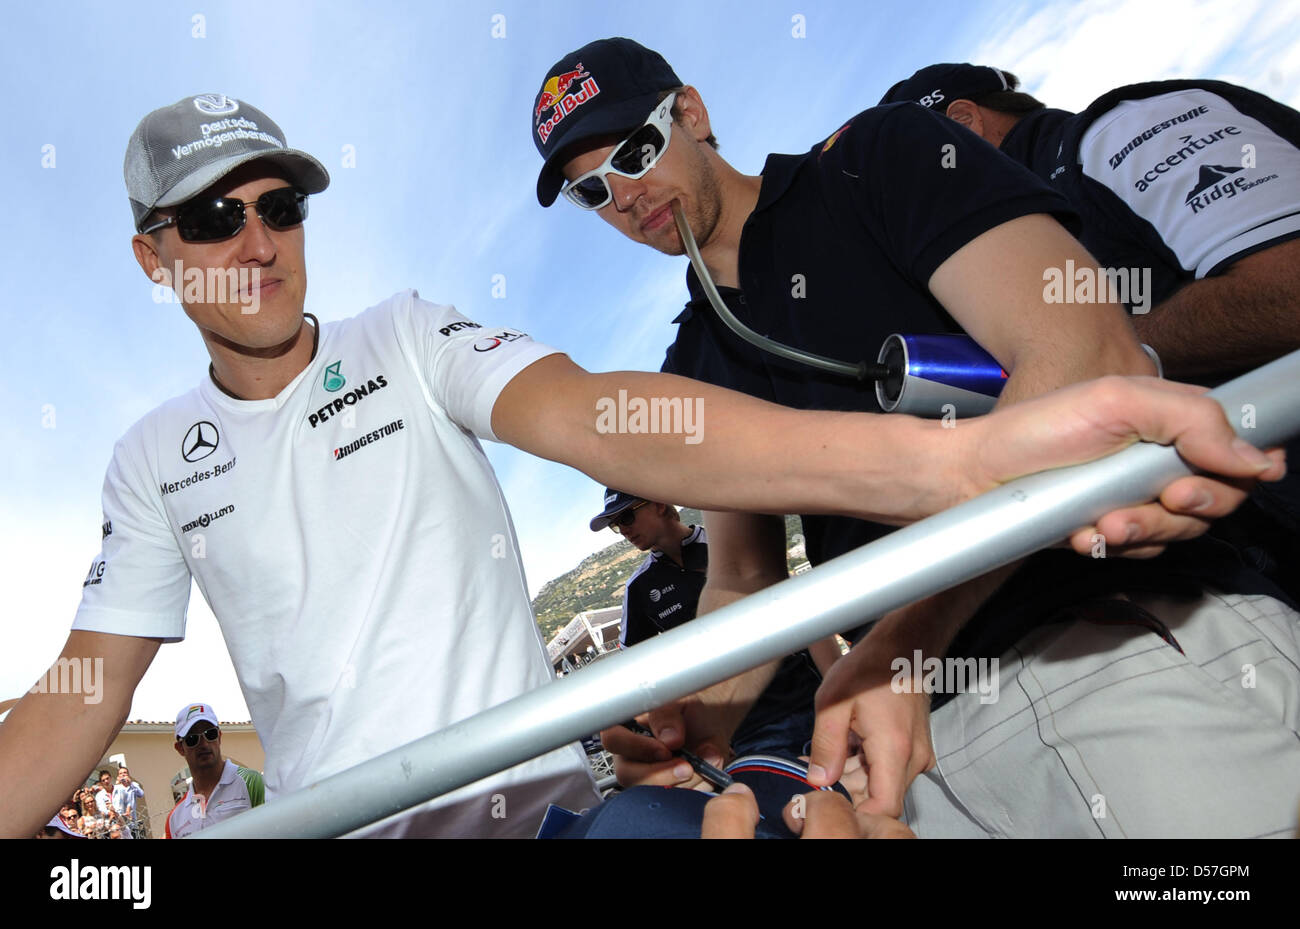 German driver Michael Schumacher of Mercedes GP (L) and compatriot Sebastian Vettel of RedBull Racing (R) arrive for the drivers' parade at the street citrcuit of Monte Carlo, Monaco, 16 May 2010. The 2010 Formula 1 Grand Prix of Monaco is held on the street circuit of the Pricipality. Photo: Peter Steffen Stock Photo